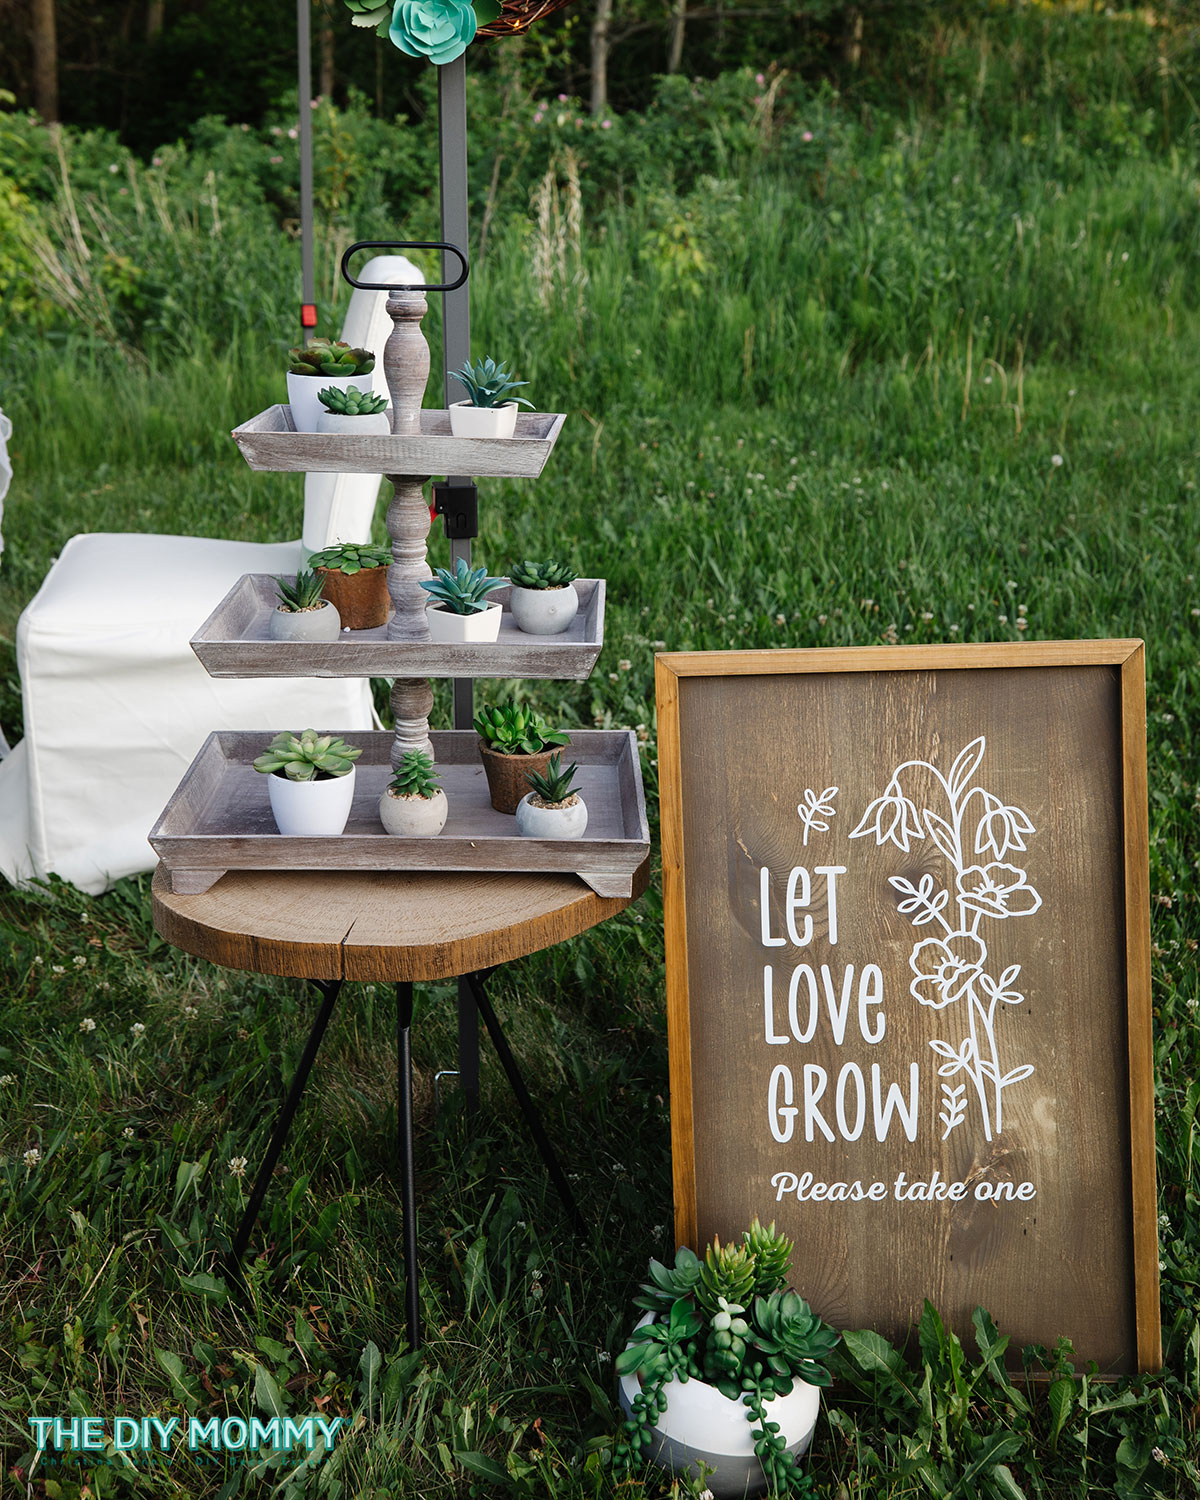 Outdoor wedding decorations on a budget